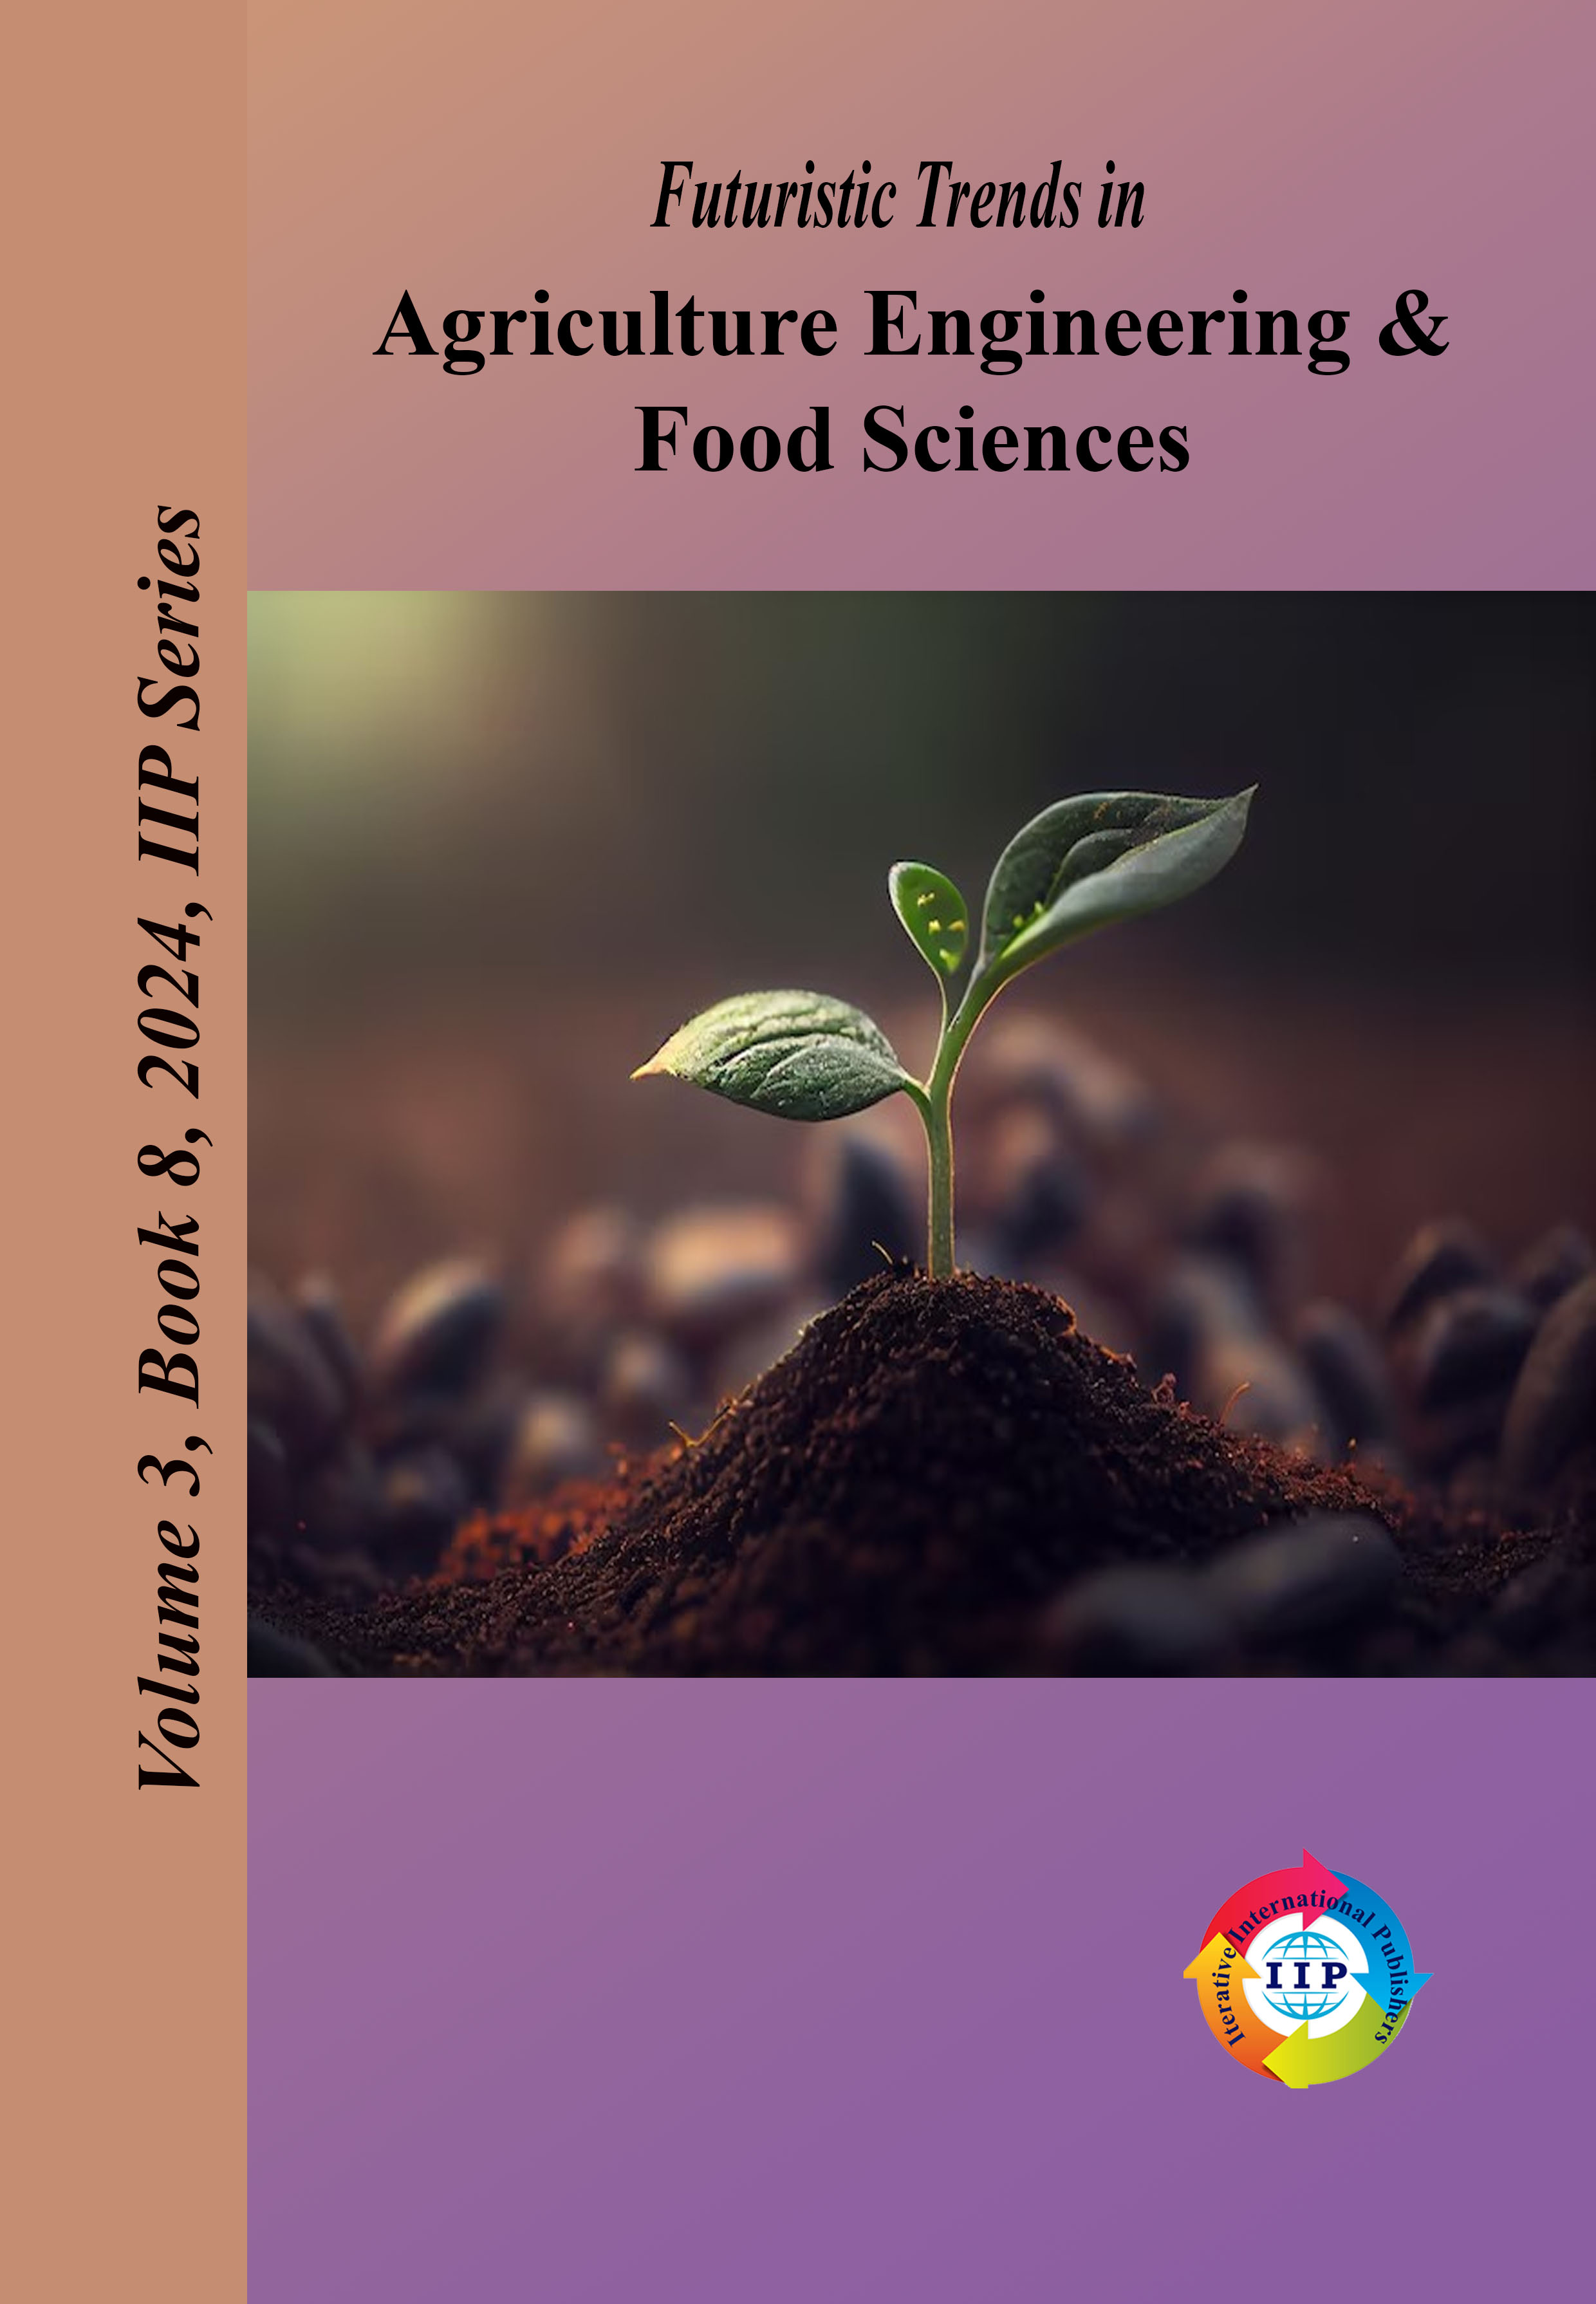 Futuristic Trends in Agriculture Engineering & Food Sciences Volume 3 Book 8